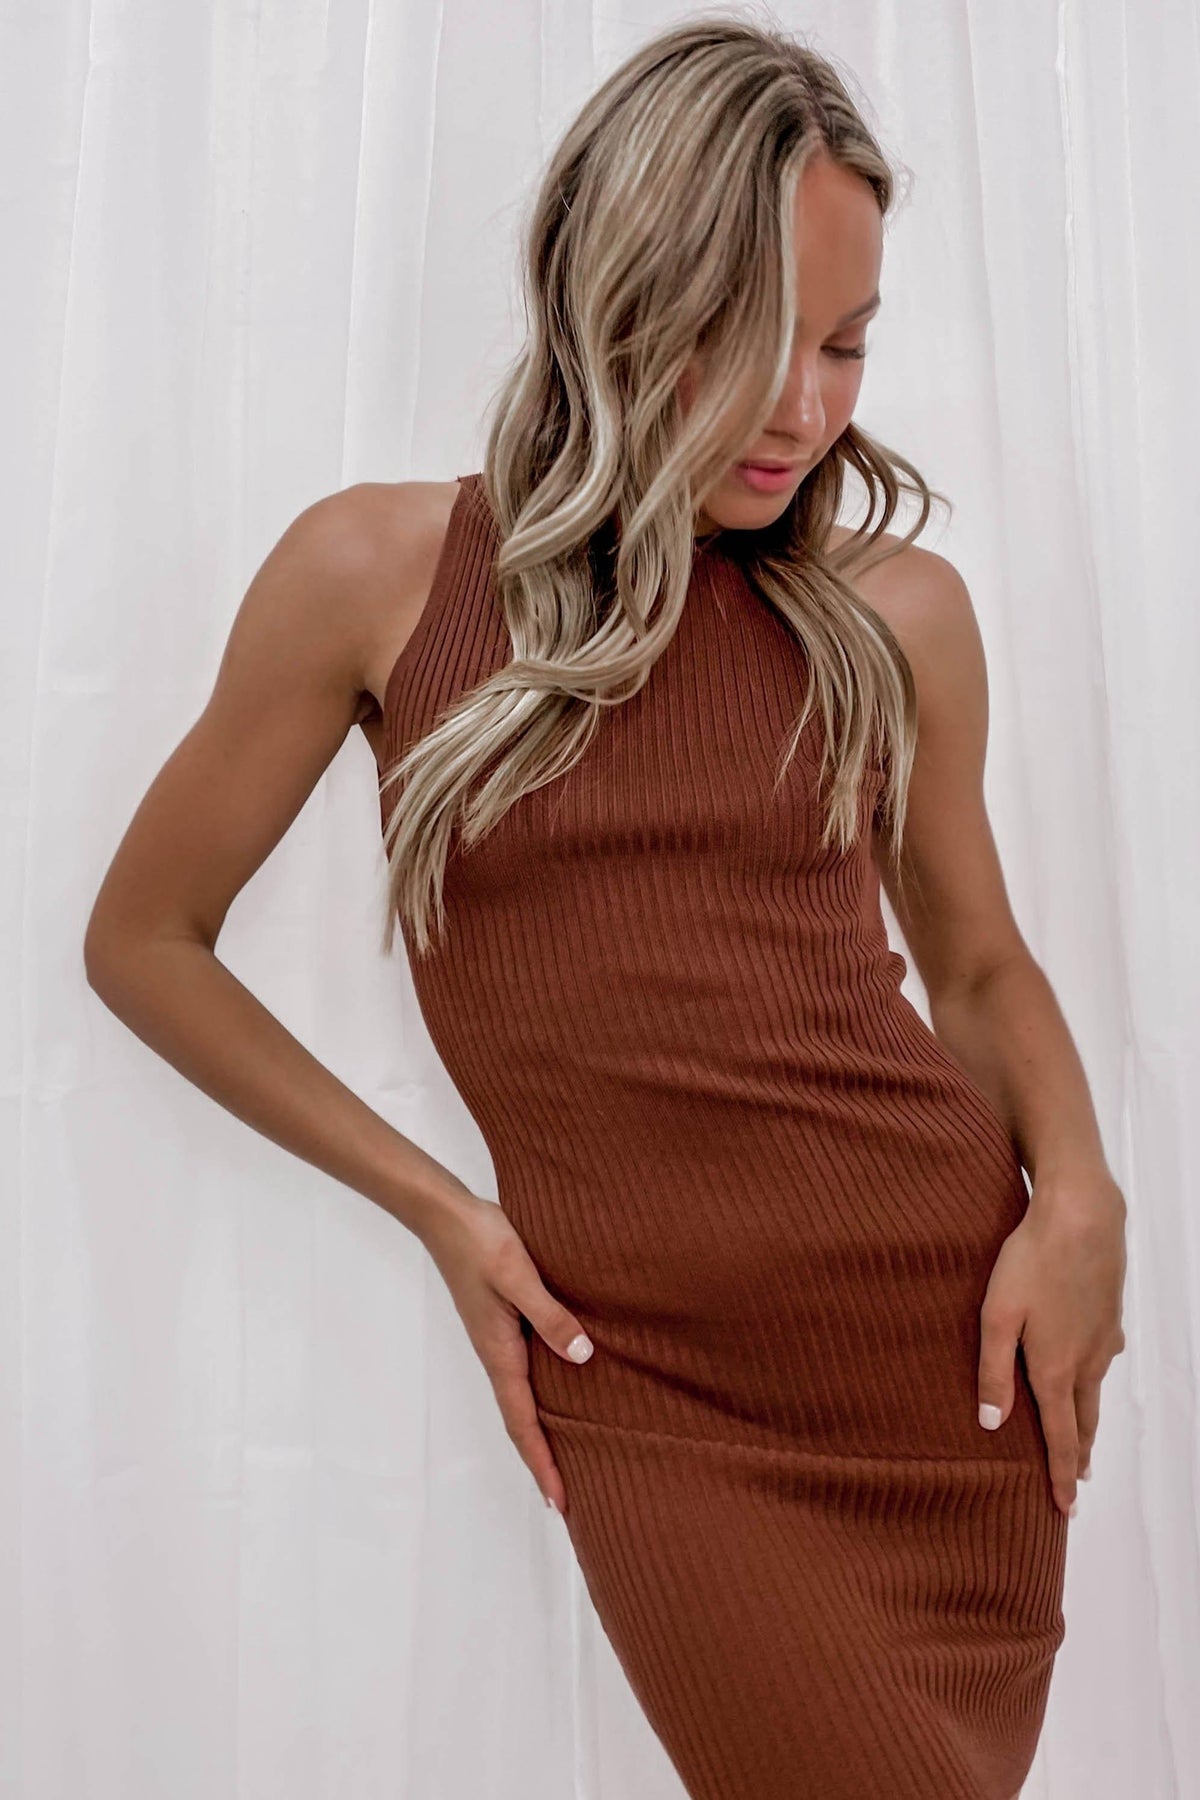 Satisfy My Love Dress, BODYCON, DRESS, DRESSES, HIGH NECK, OPEN BACK, ORANGE, RED, RIBBED, Sale, TIE UP, Satisfy My Love Dress only $53.70 @ MISHKAH ONLINE FASHION BOUTIQUE, Shop The Latest Women&#39;s Dresses - Our New Satisfy My Love Dress is only $53.70, @ MISHKAH ONLINE FASHION BOUTIQUE-MISHKAH